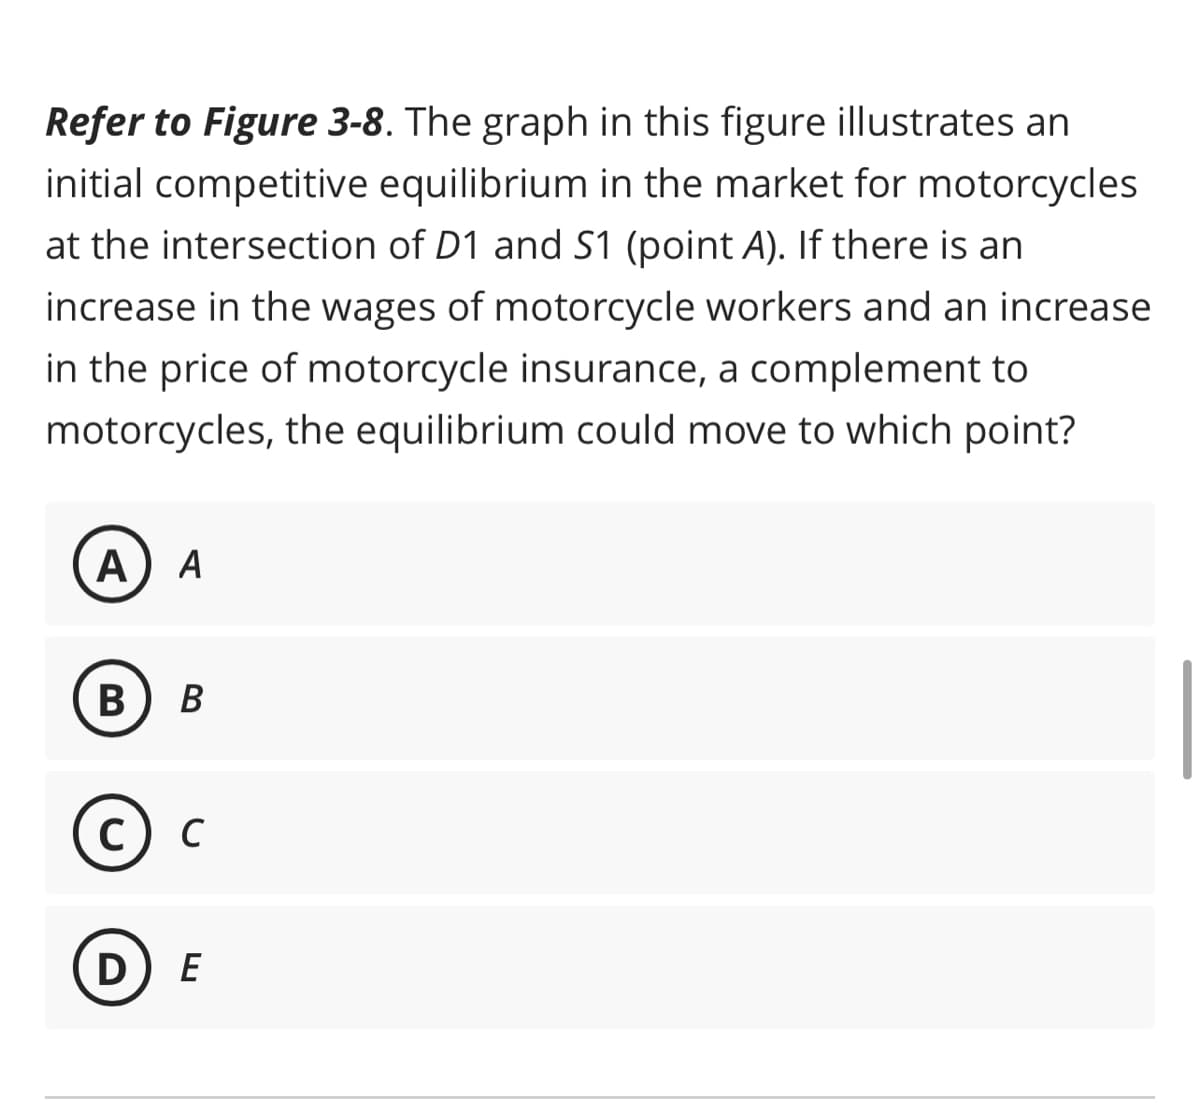 Refer to Figure 3-8. The graph in this figure illustrates an
initial competitive equilibrium in the market for motorcycles
at the intersection of D1 and S1 (point A). If there is an
increase in the wages of motorcycle workers and an increase
in the price of motorcycle insurance, a complement to
motorcycles, the equilibrium could move to which point?
A A
B B
C) C
DE